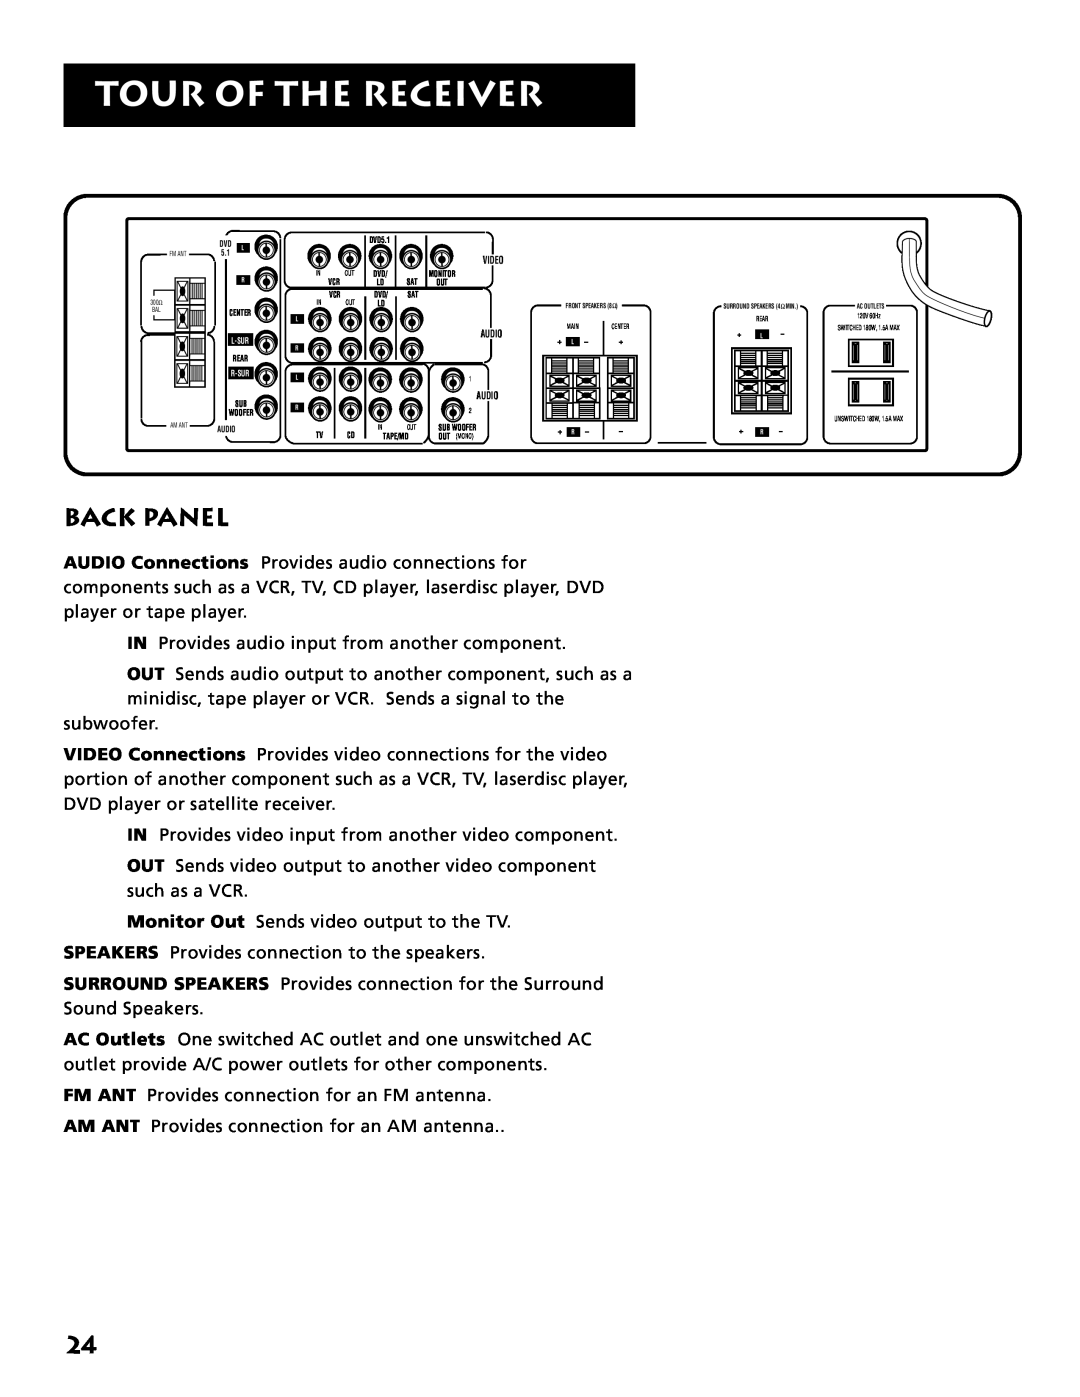 Electrohome RV-3798 manual Back Panel, Tour Of The Receiver 